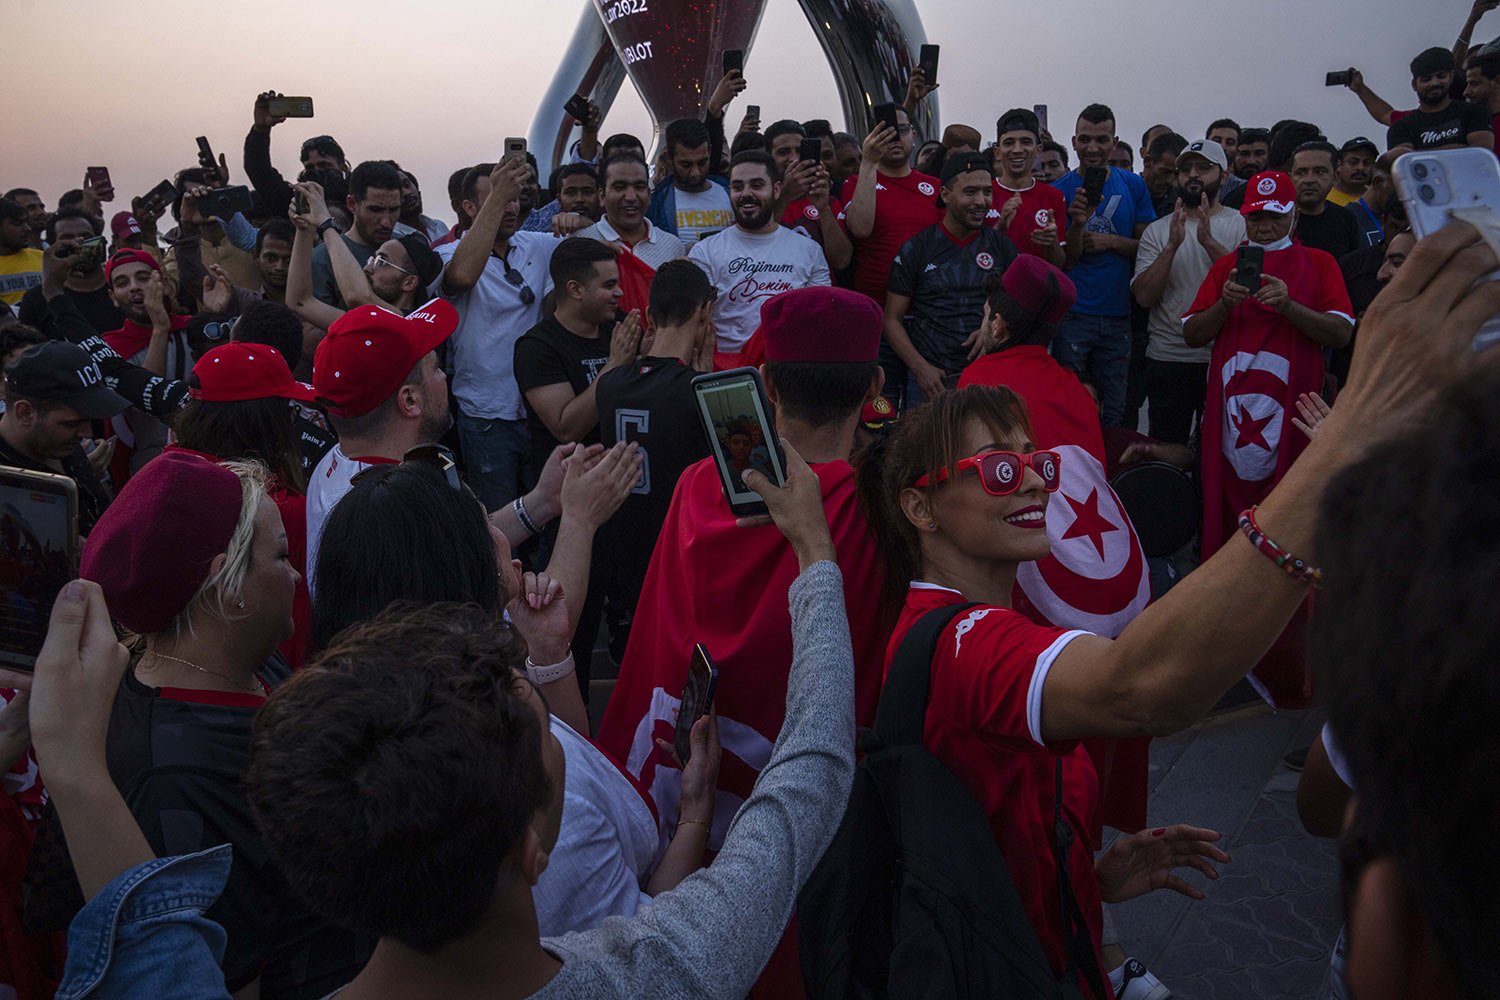  Tunisian football fans celebrate their team, who will be competing in the World Cup finals for a sixth time, in front of the official FIFA World Cup Countdown Clock on Doha's corniche, 30 days ahead until the start of the World Cup, in Qatar, Friday